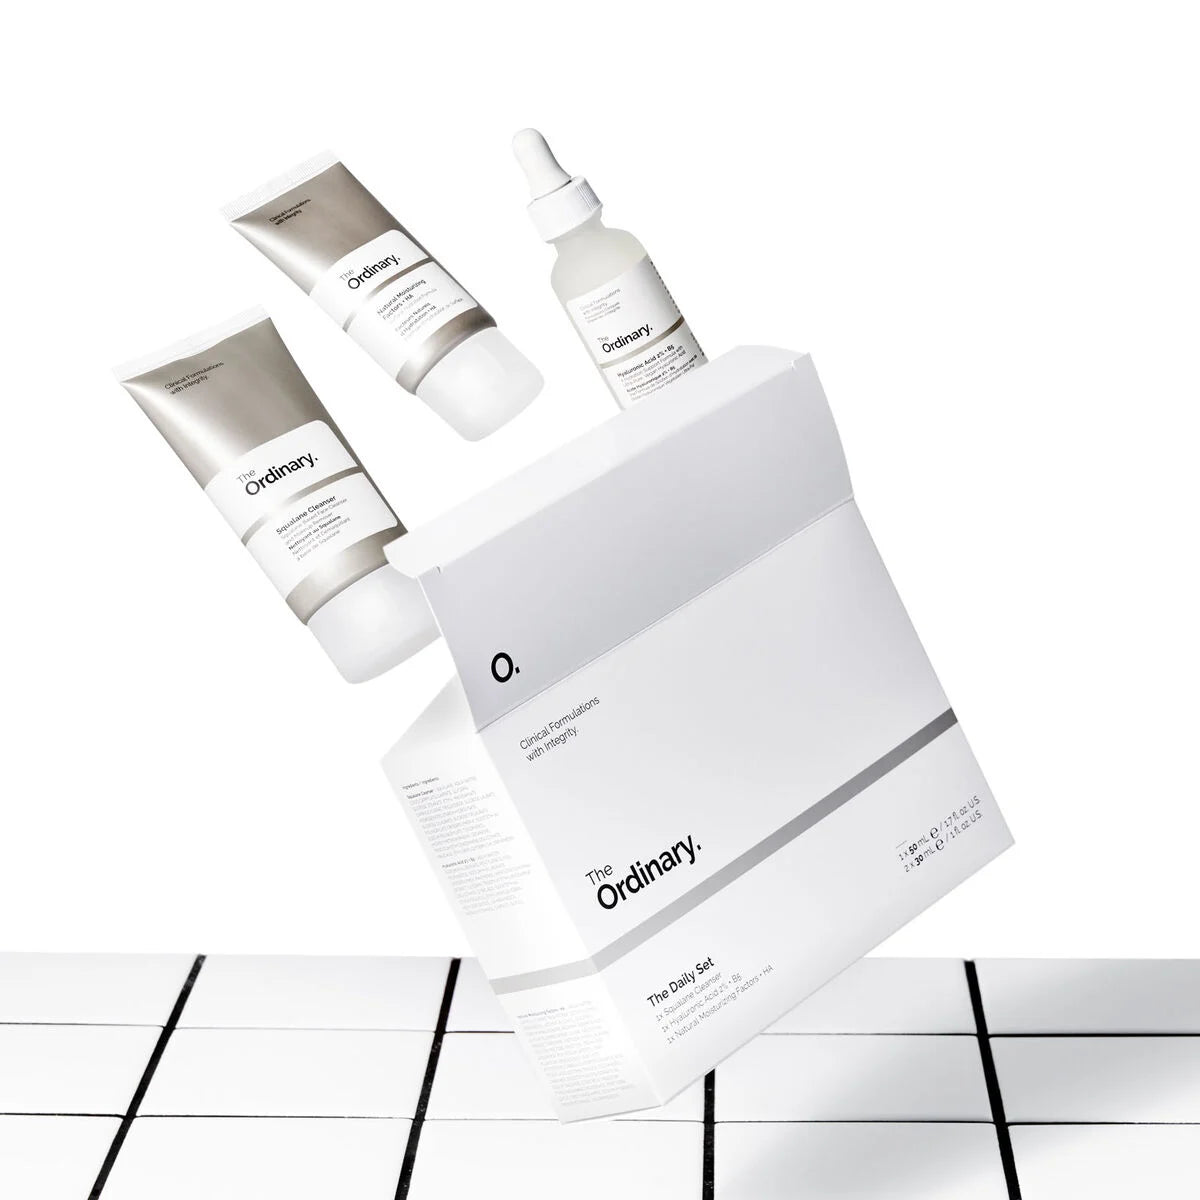 The Ordinary - The Daily Set